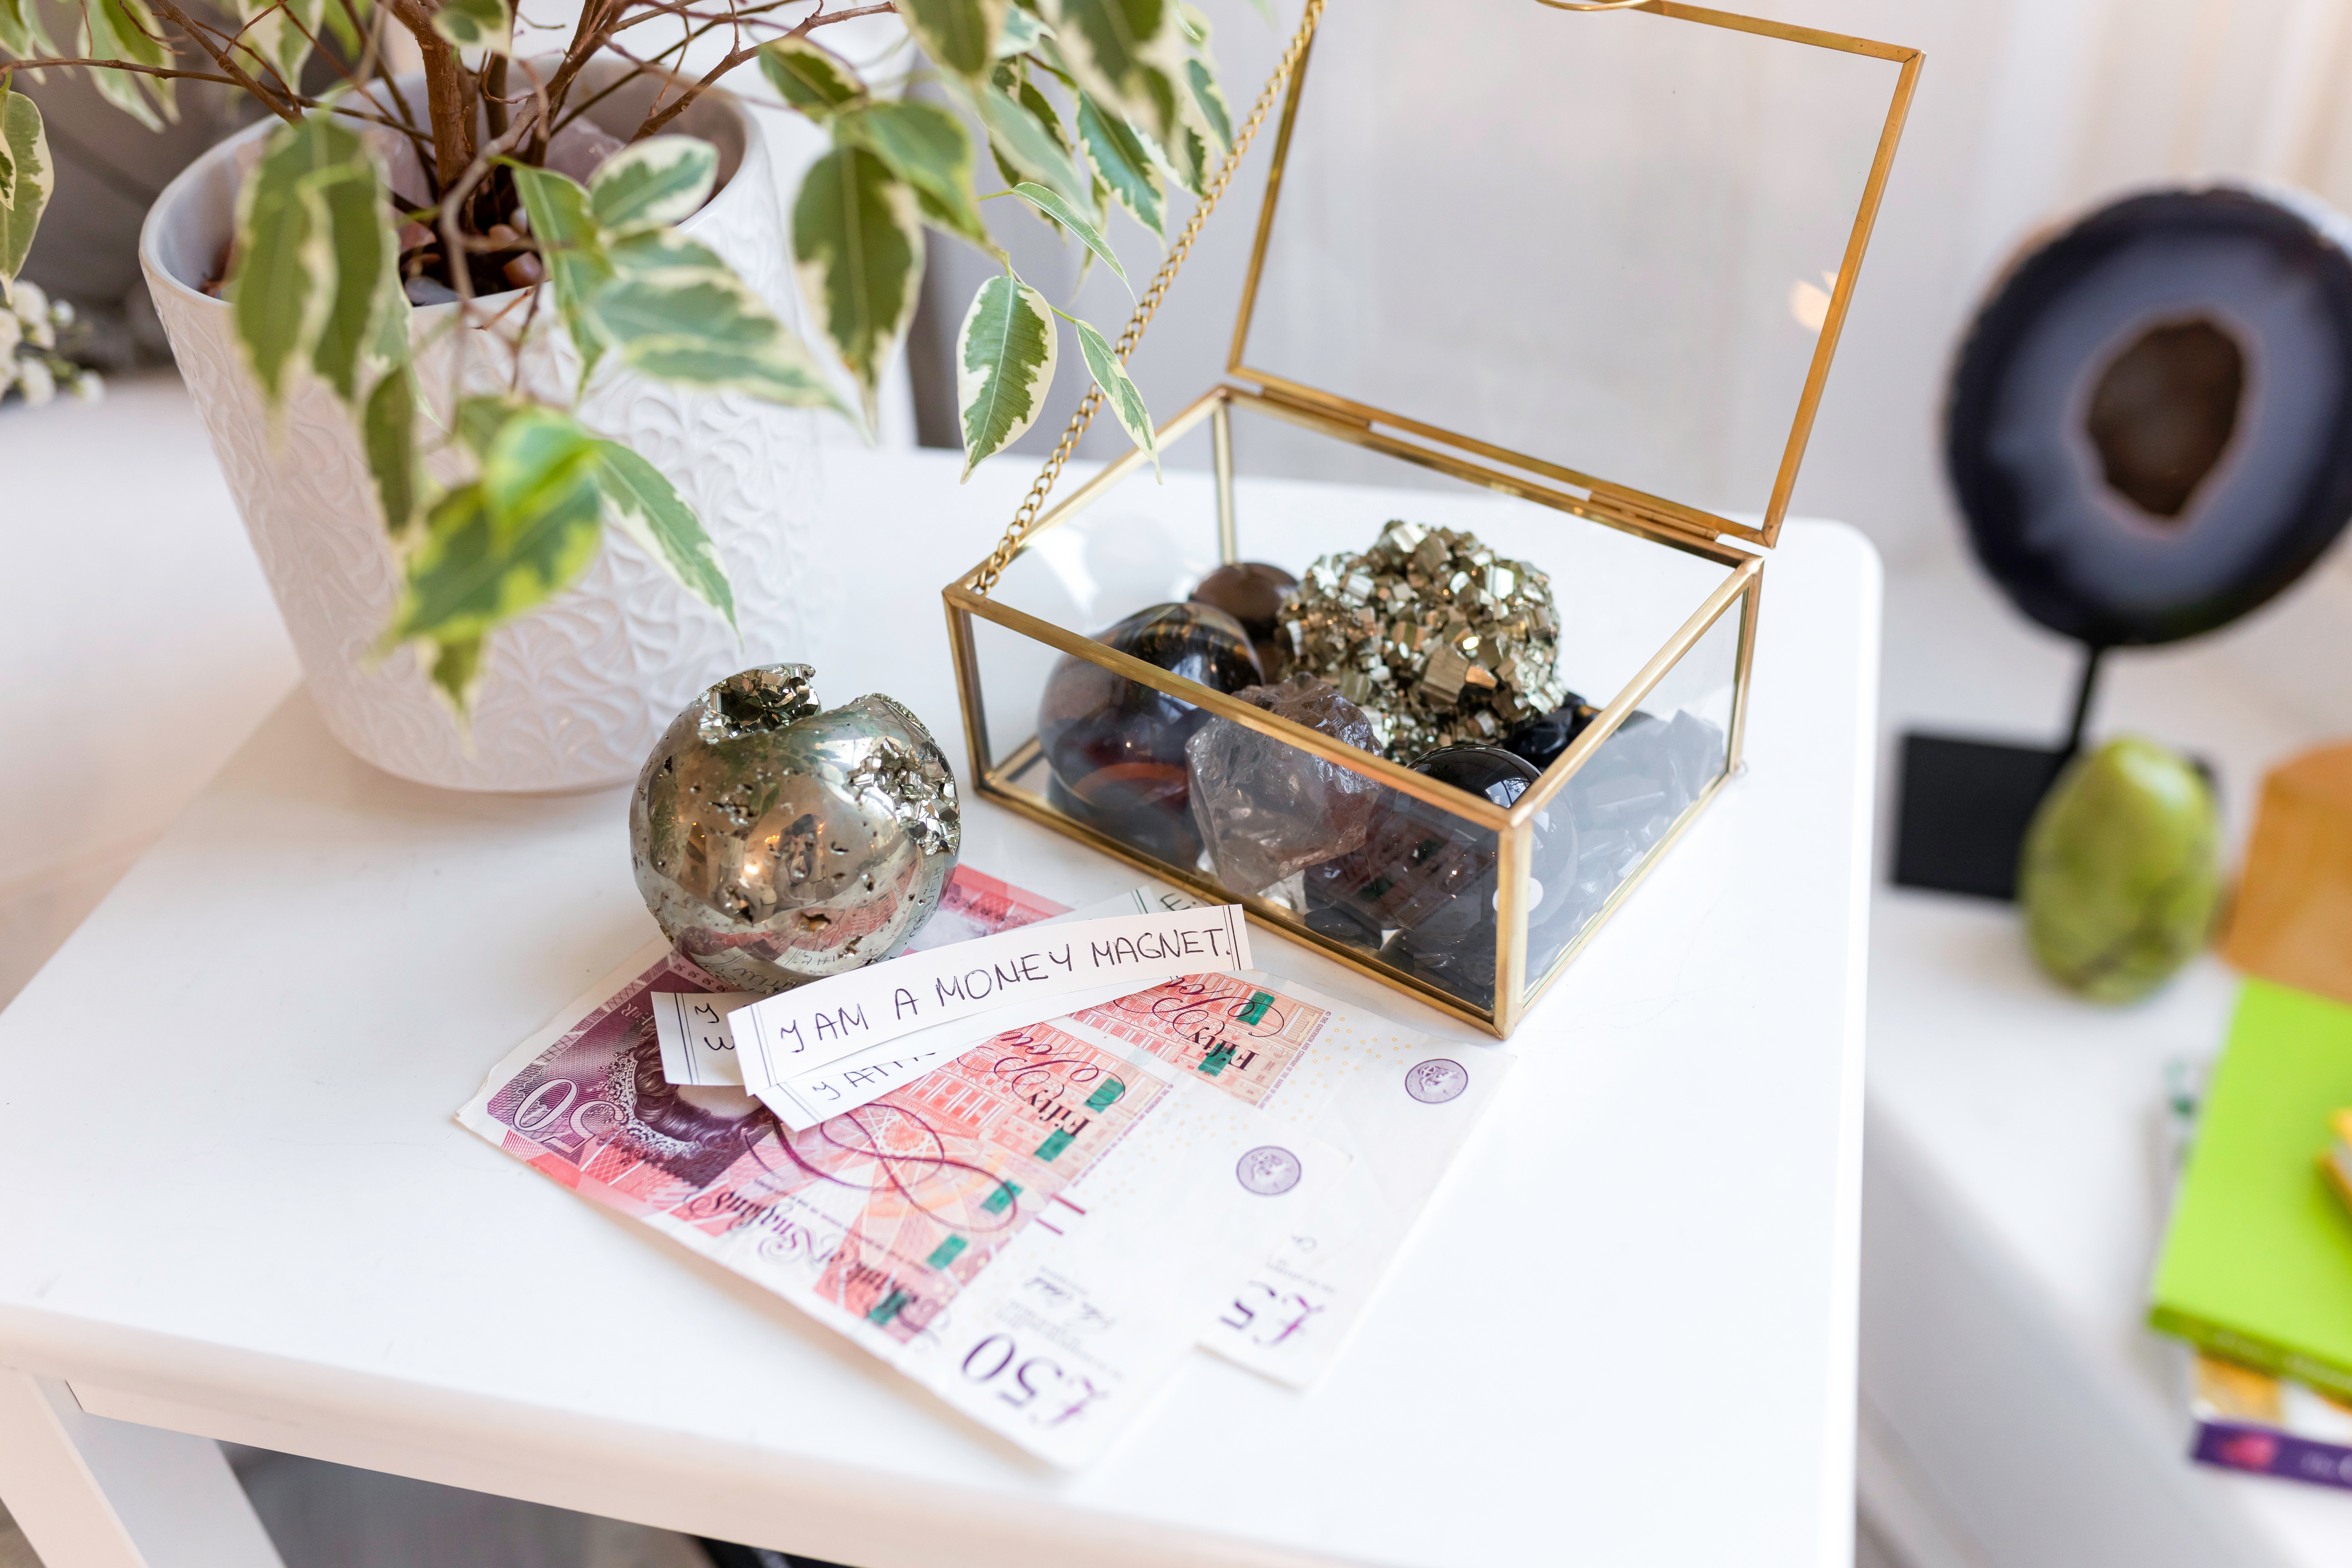 Image of jewellery and money next to a plant, with a sign saying 'I am a money magnet'